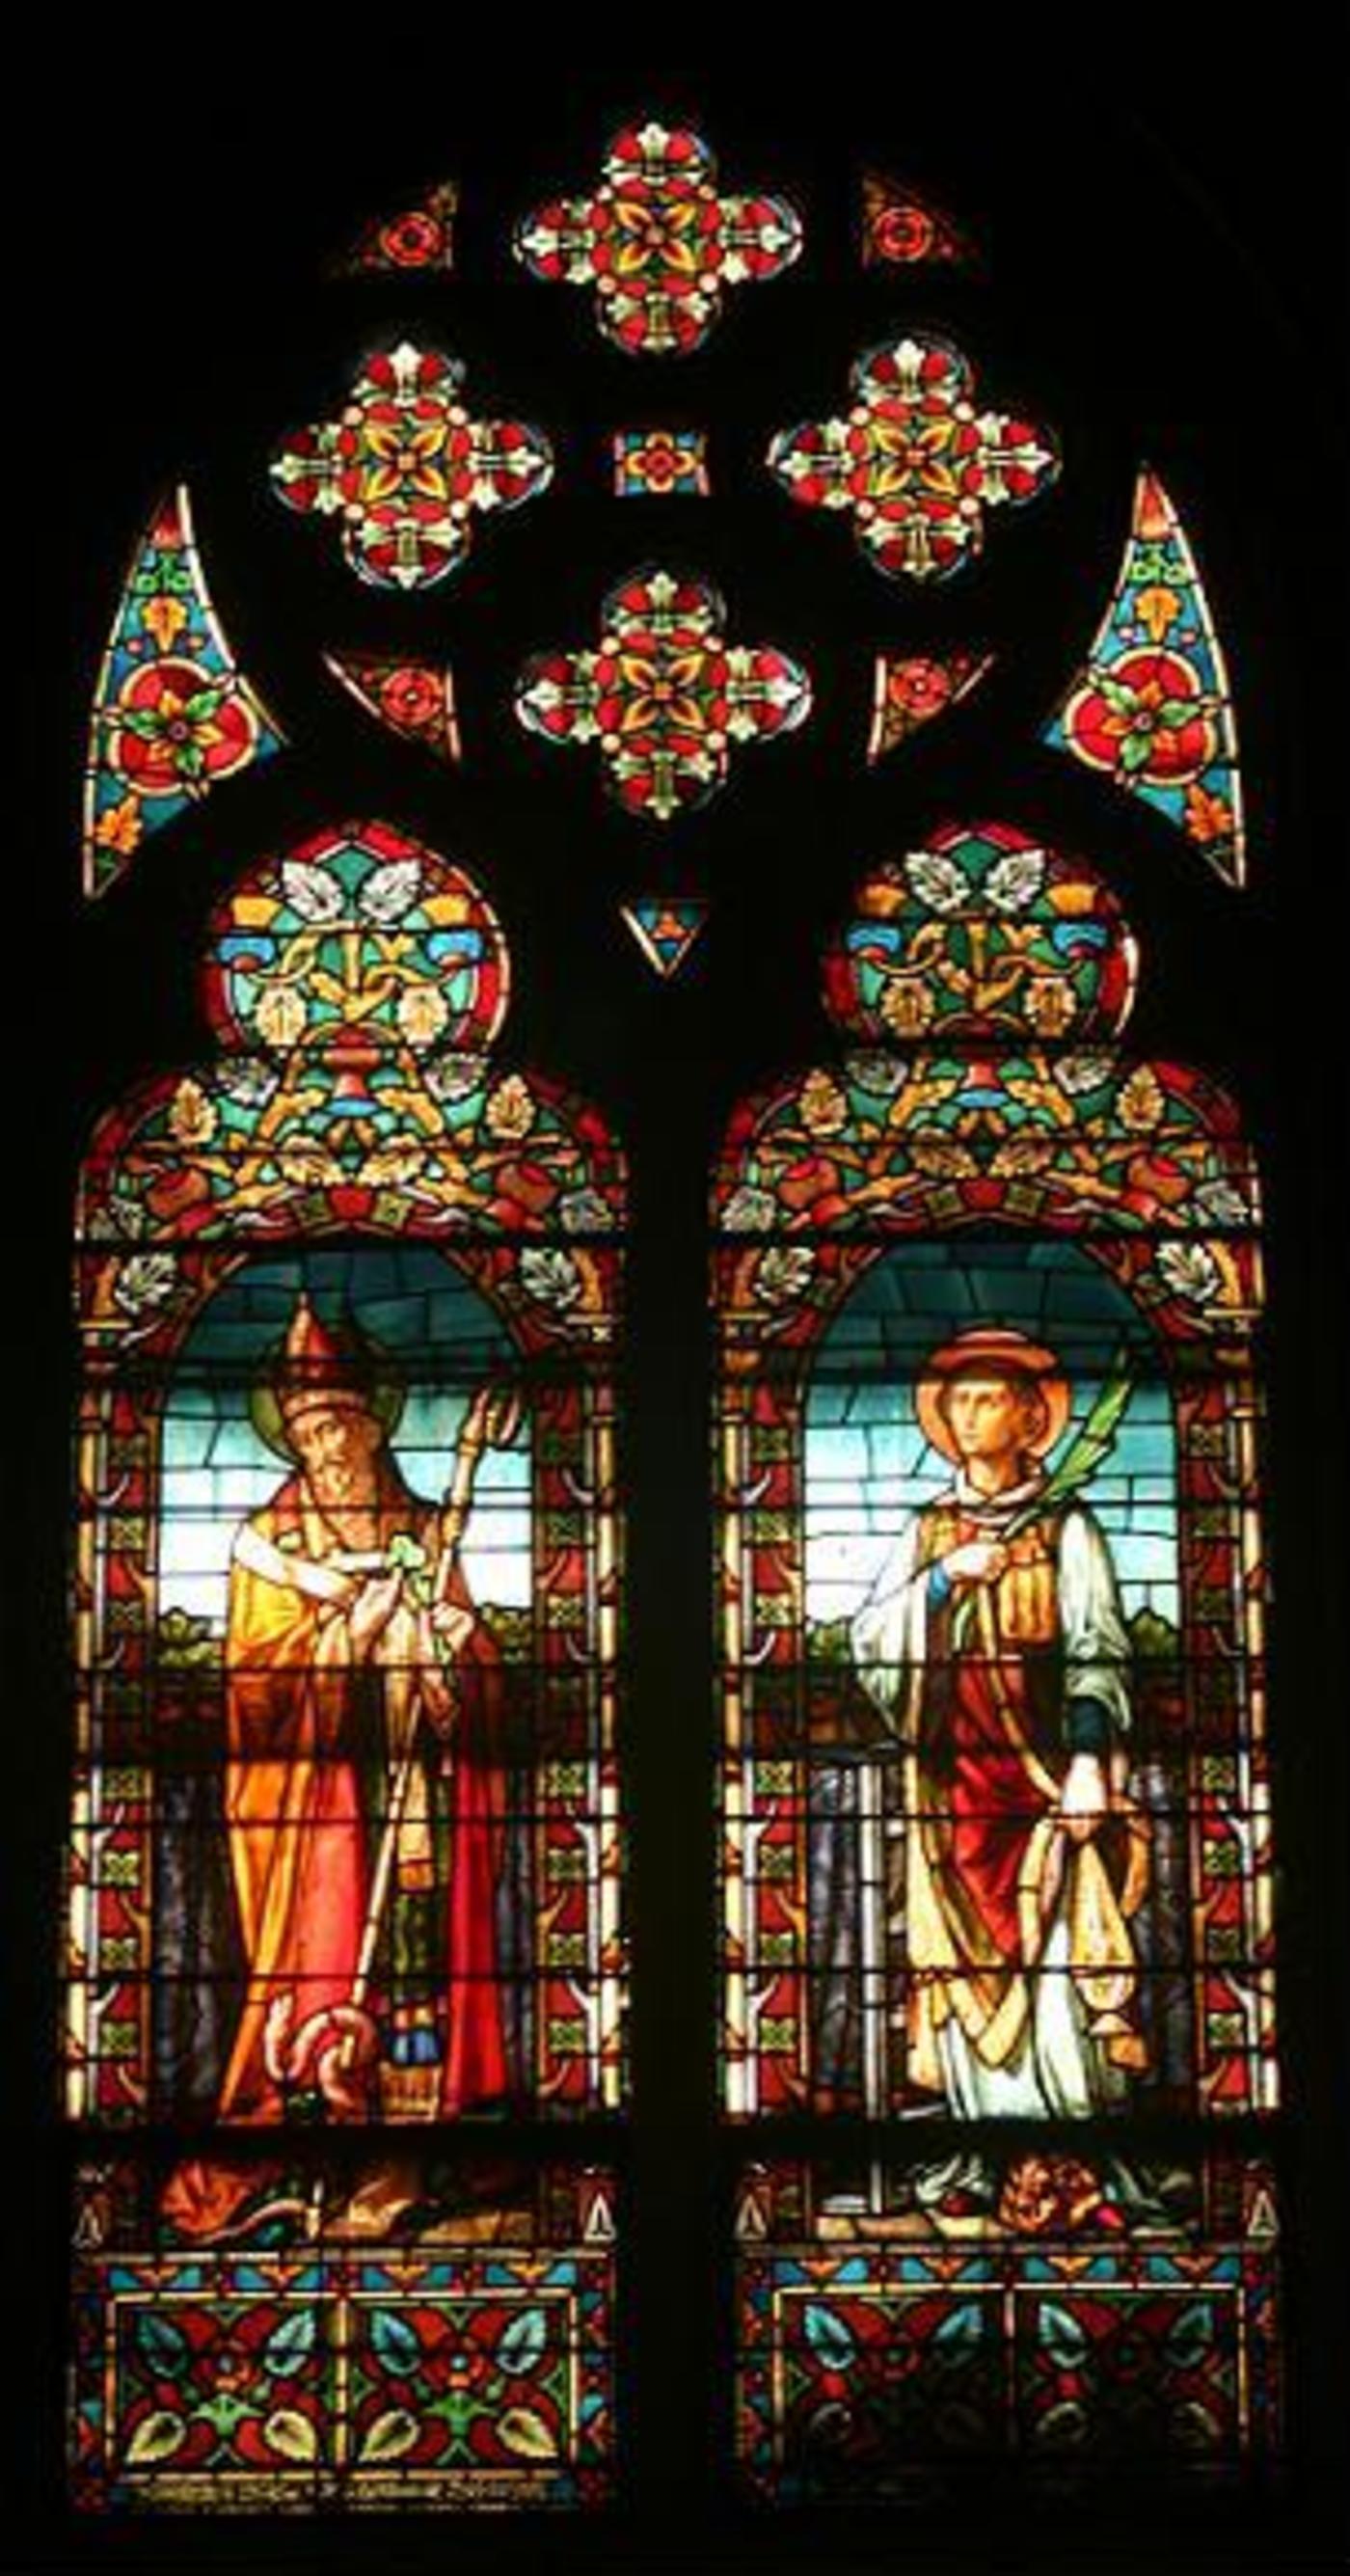 Windows 13A and 13B: Saint Patrick of Ireland and St. Stephen, Deacon